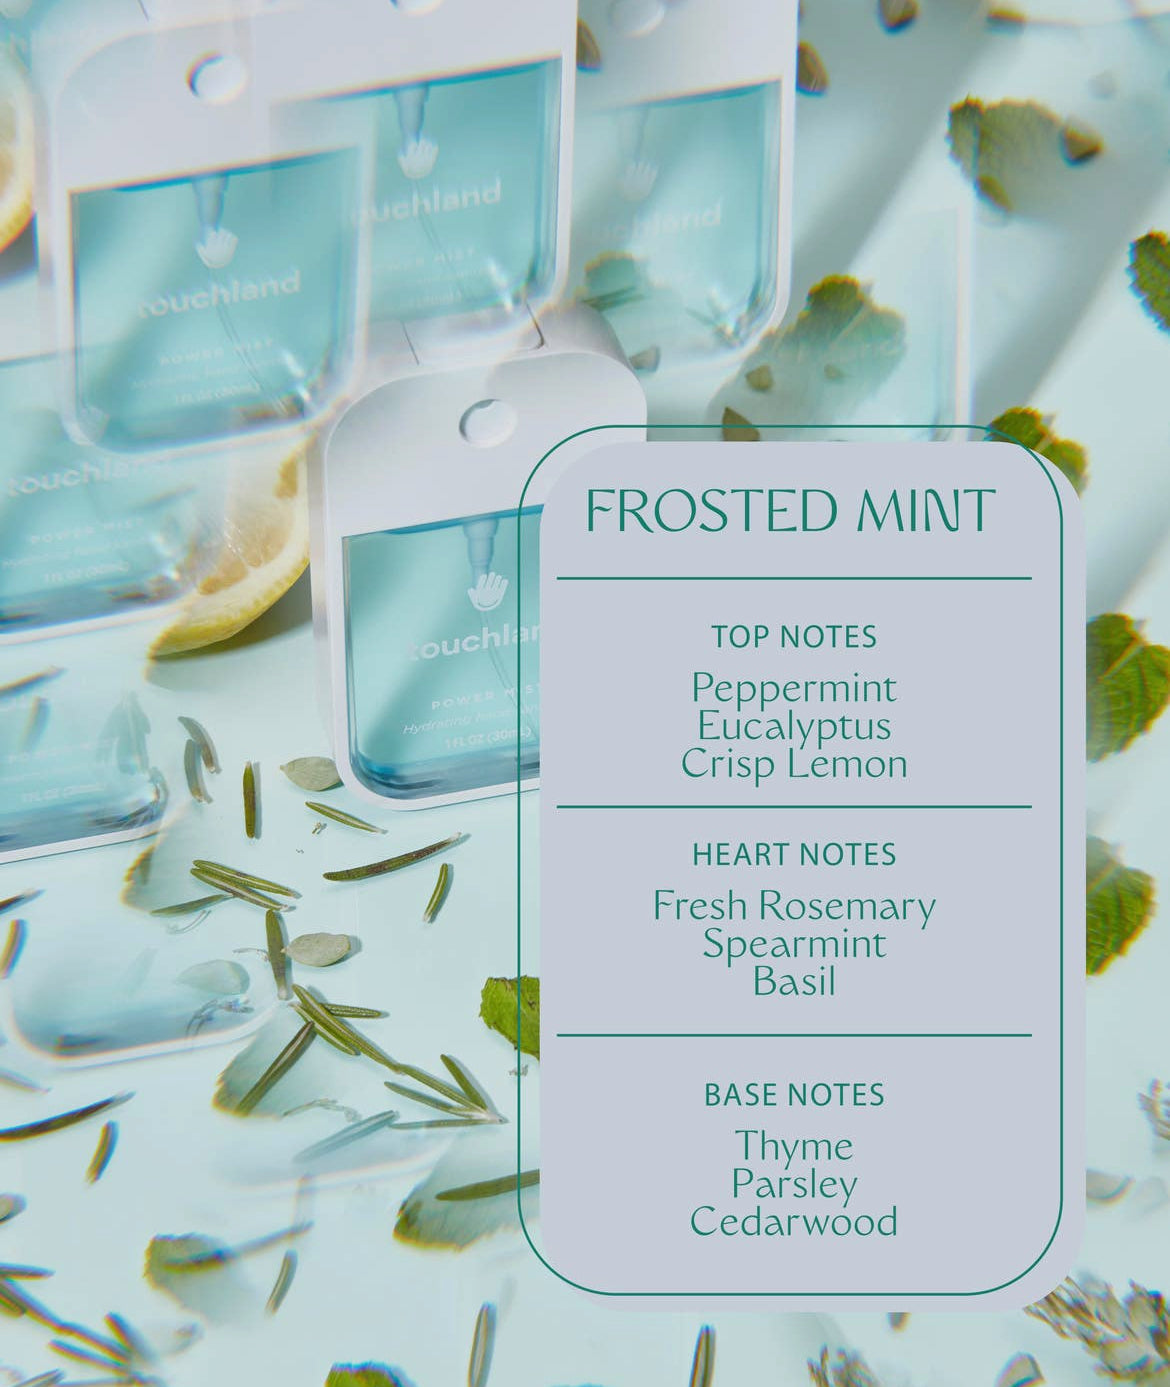 TOUCHLAND: POWER MIST FROSTED MINT